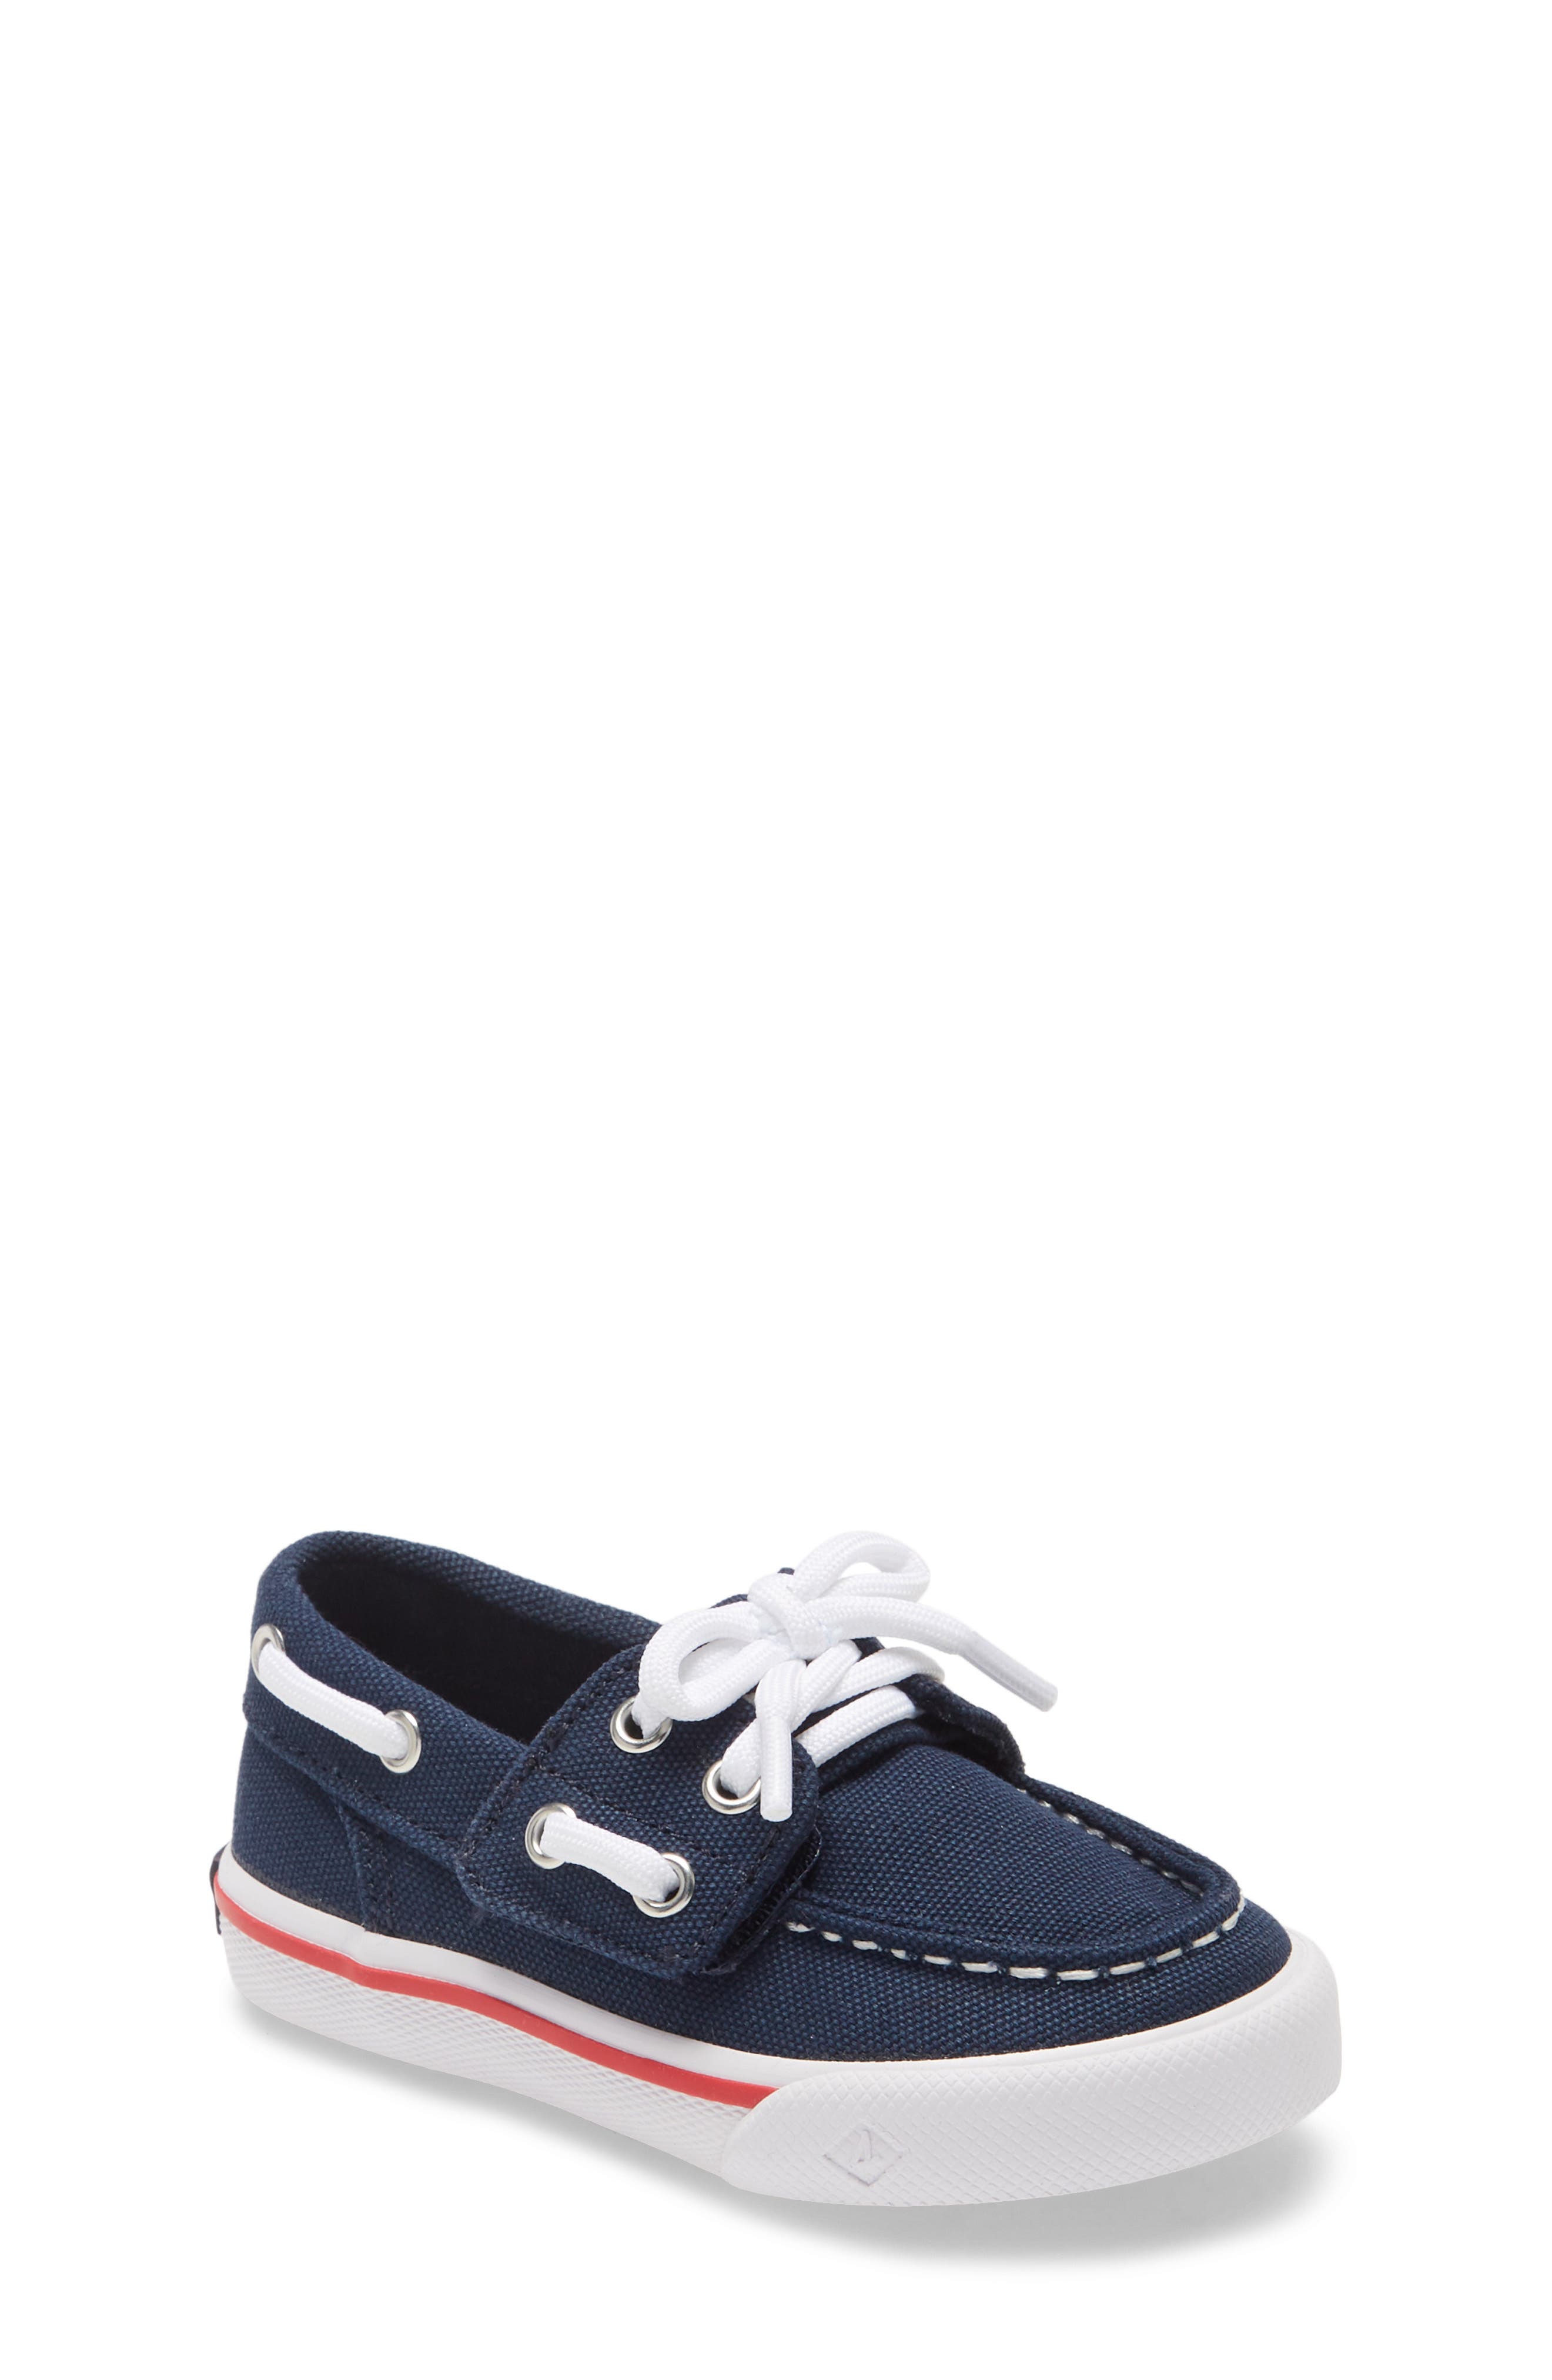 sperry baby boy shoes